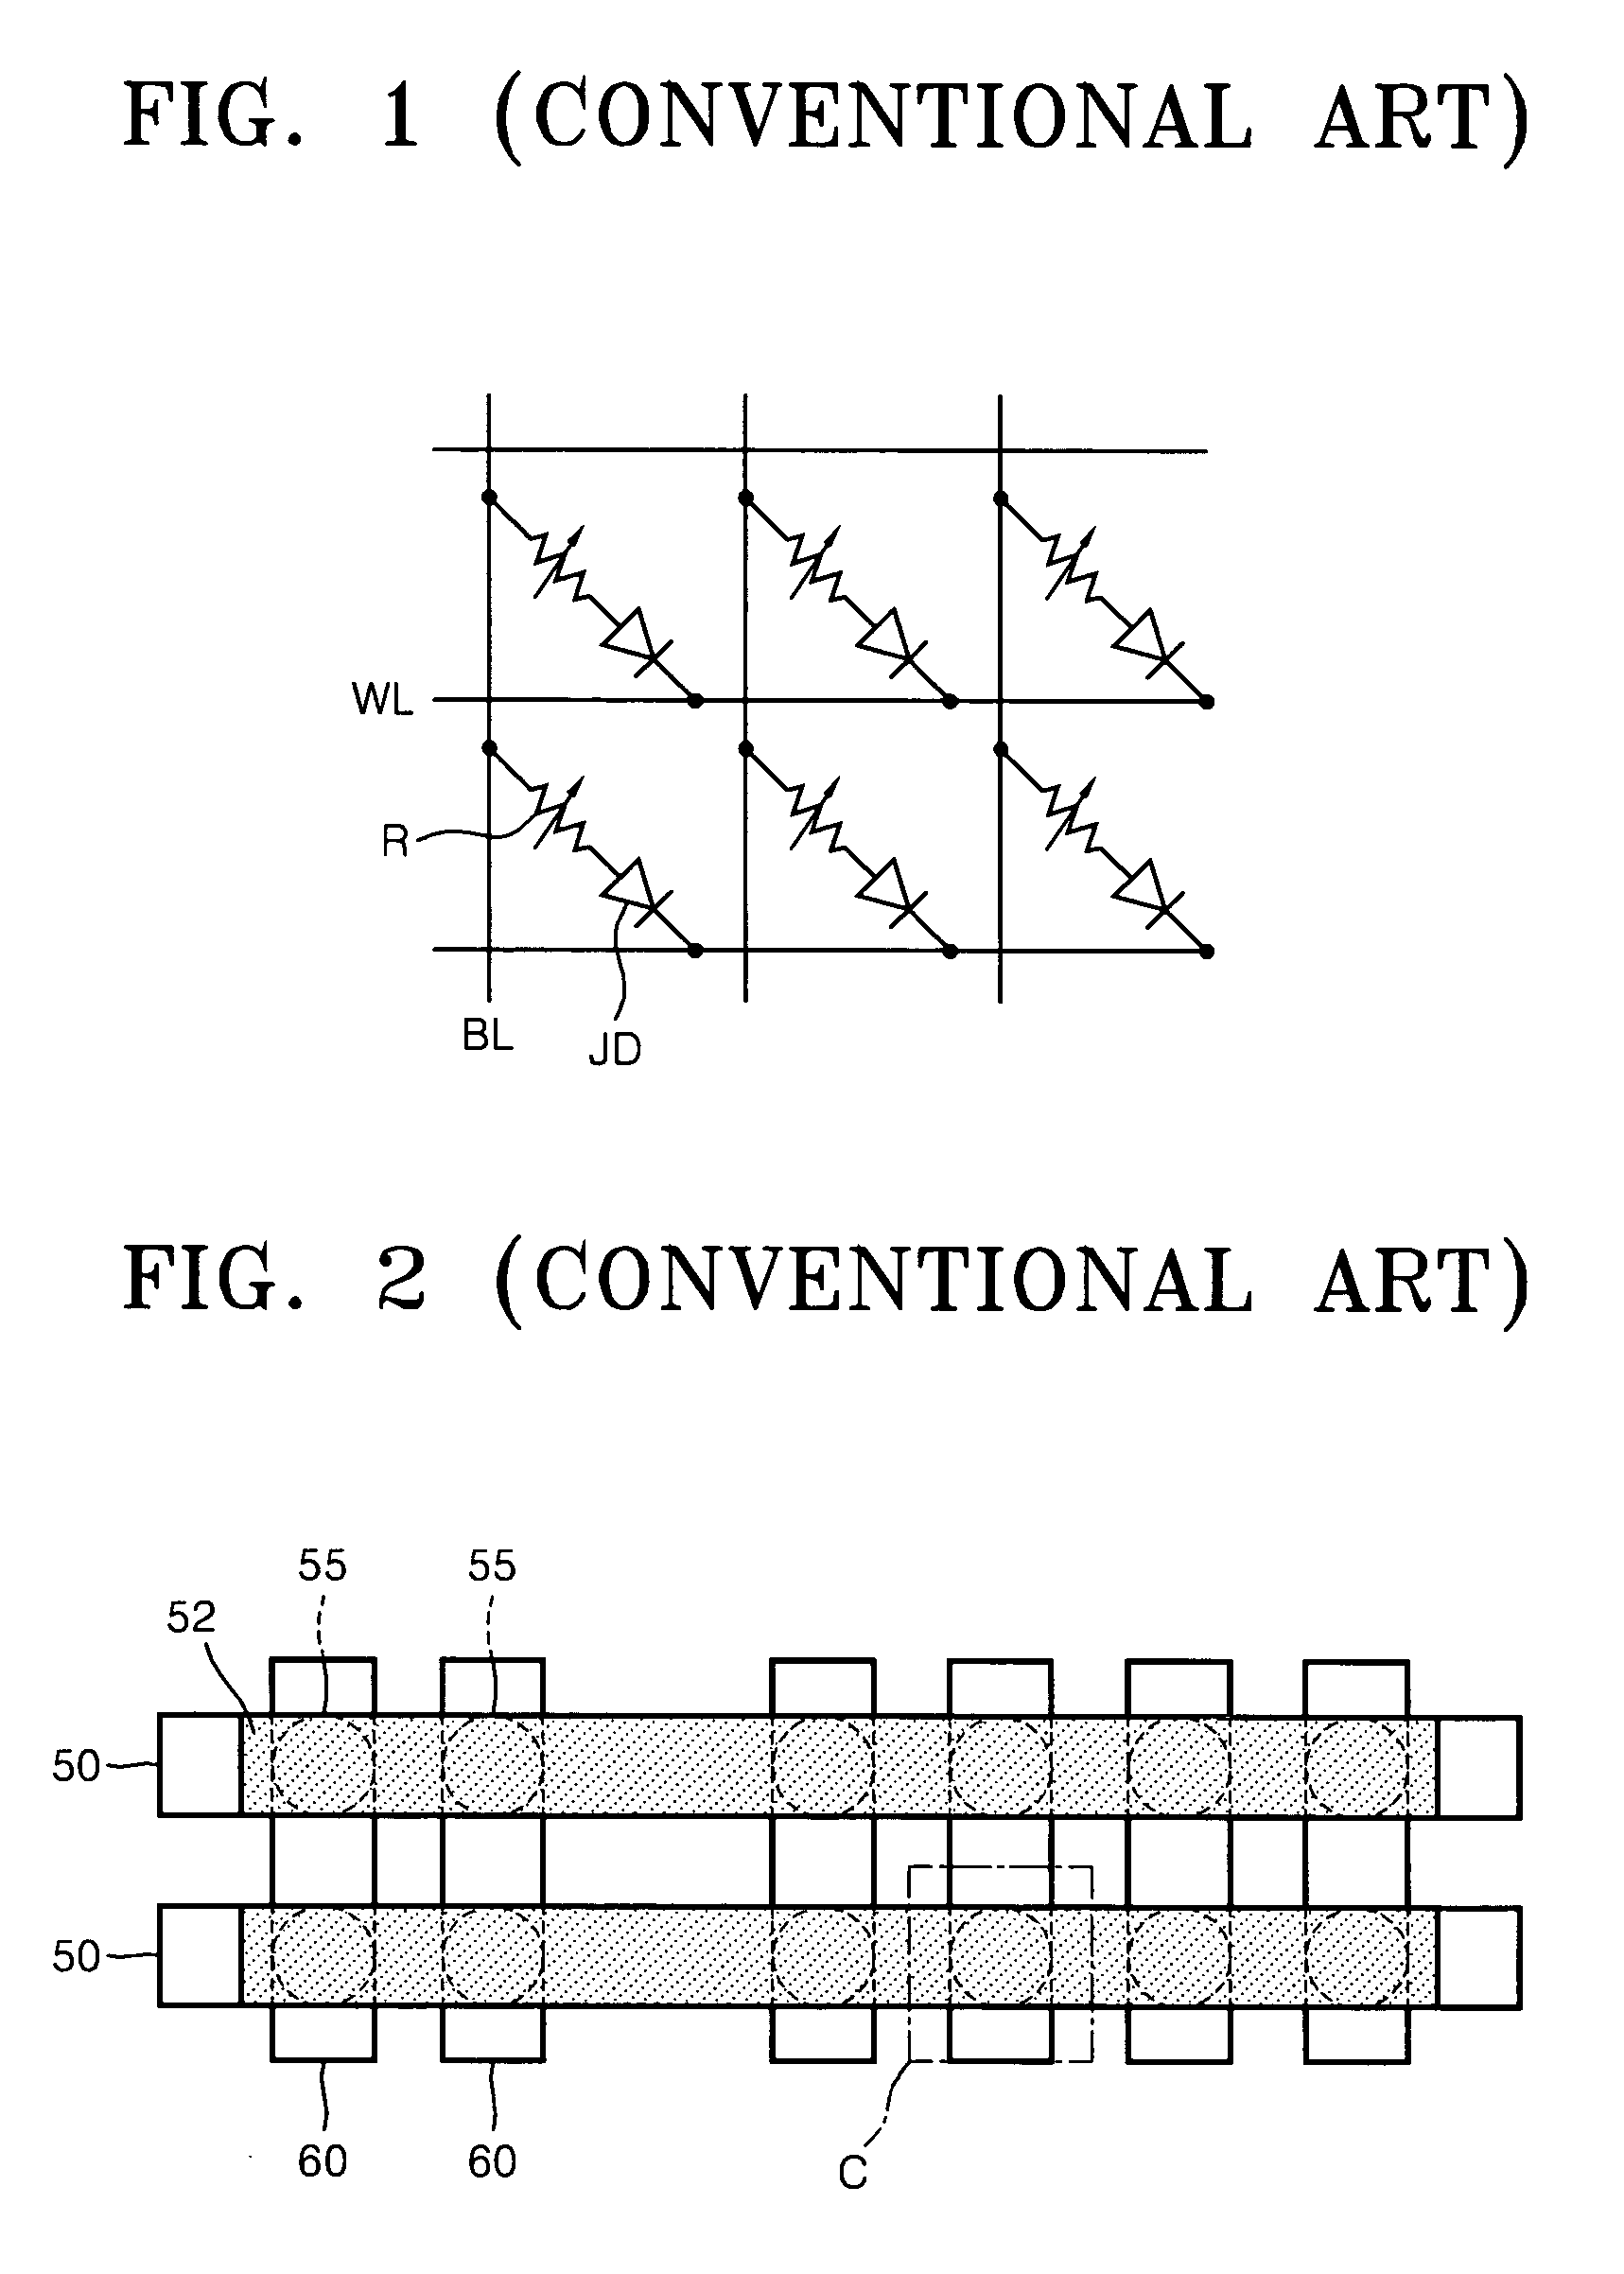 Non-volatile memory devices and method thereof